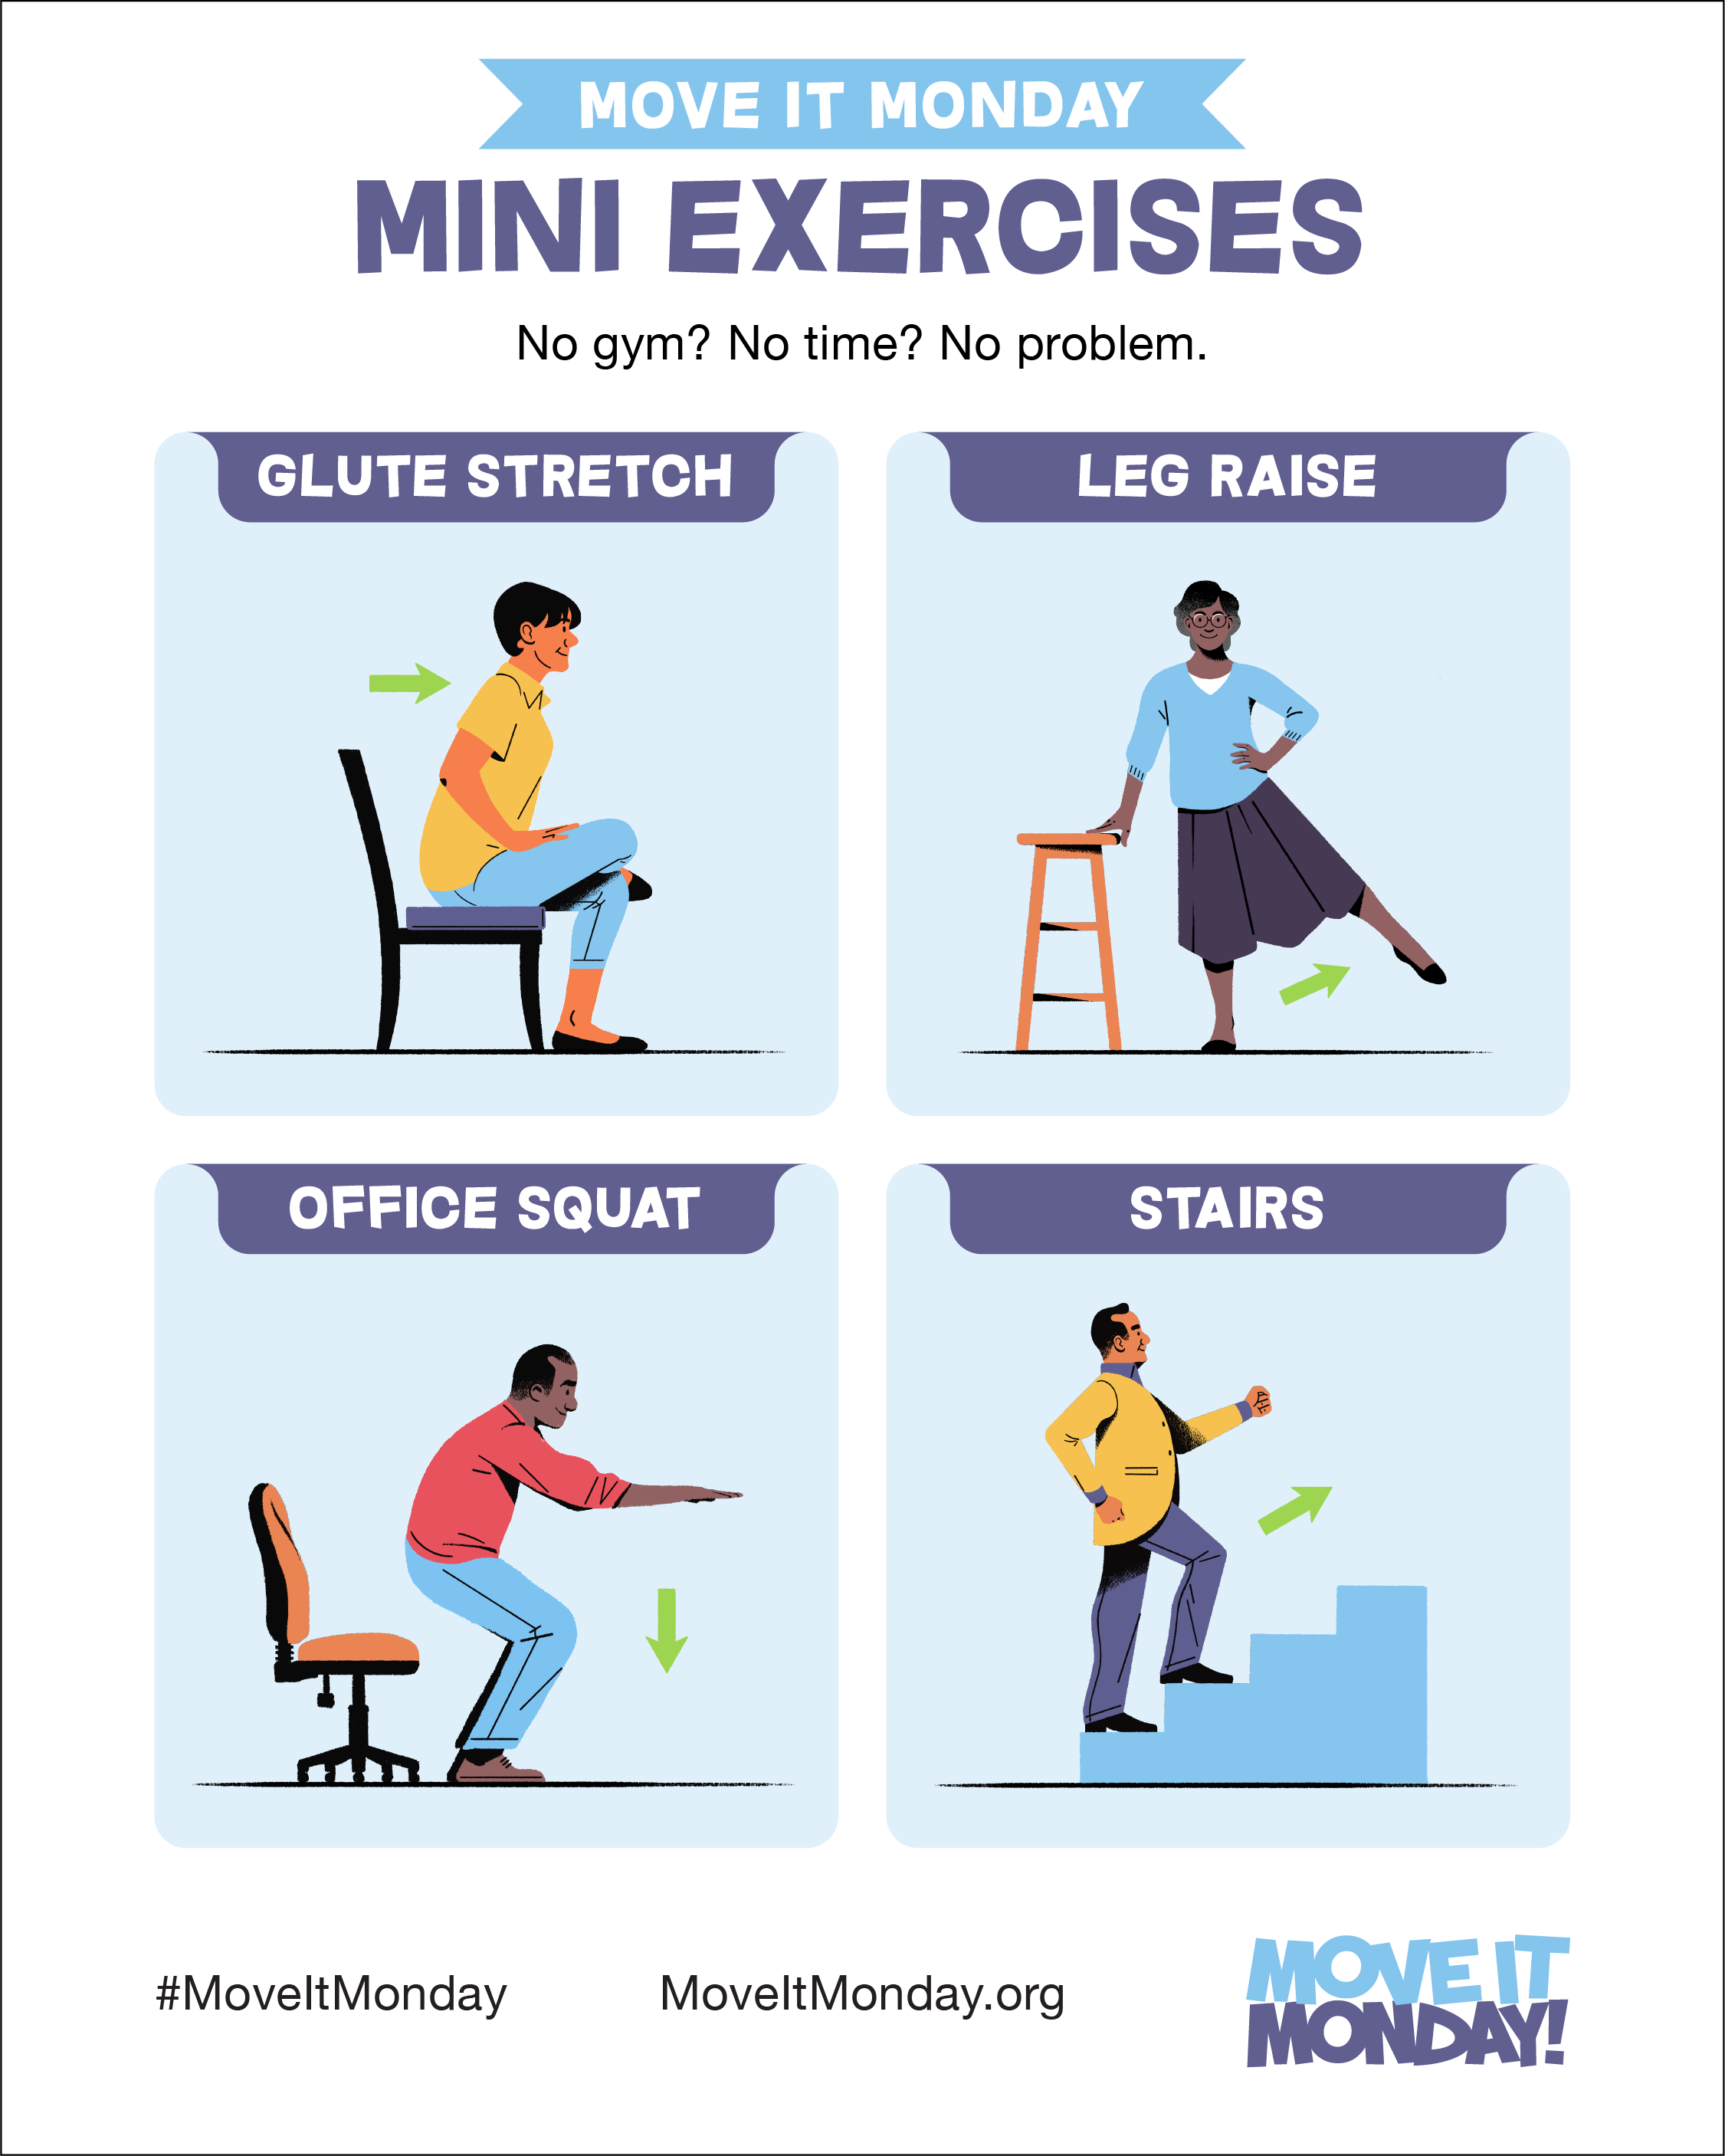 Exercise, Exercise Move More #OurHearts Whether it's walking, running, or  lifting weights, sticking with your exercise goals is more successful when  you're got